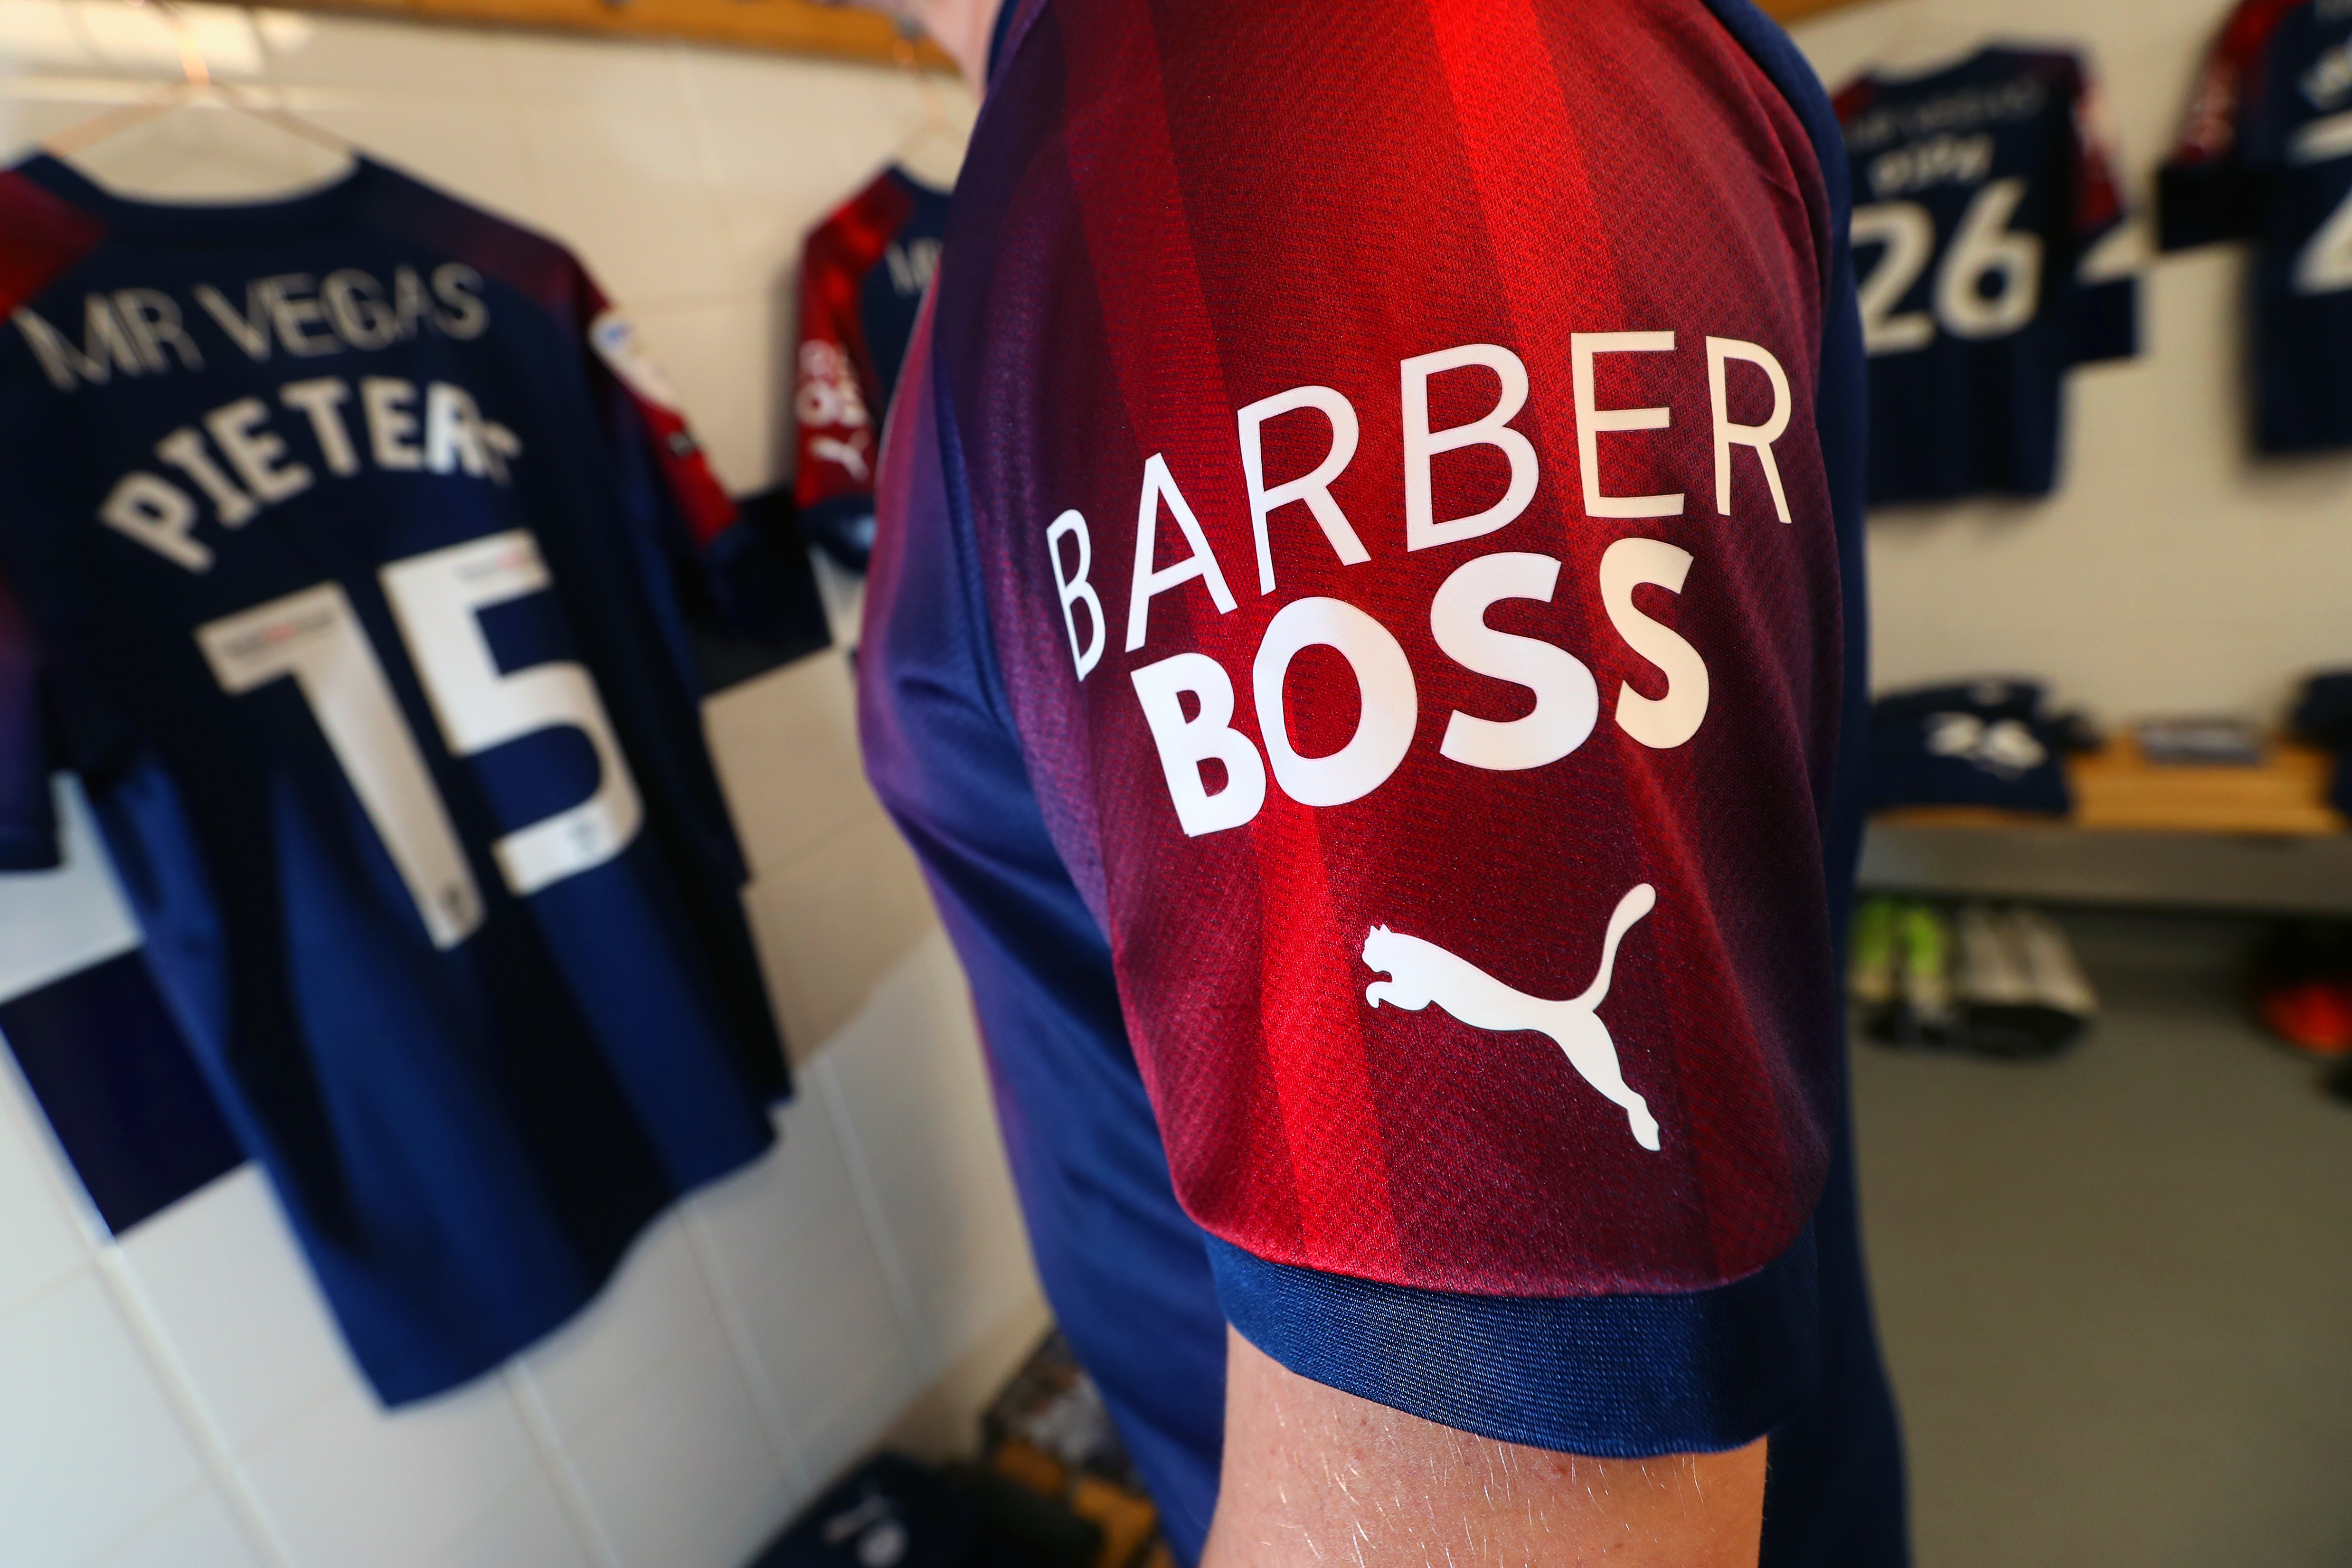 The Barber Boss logo on the sleeve of an Albion shirt.